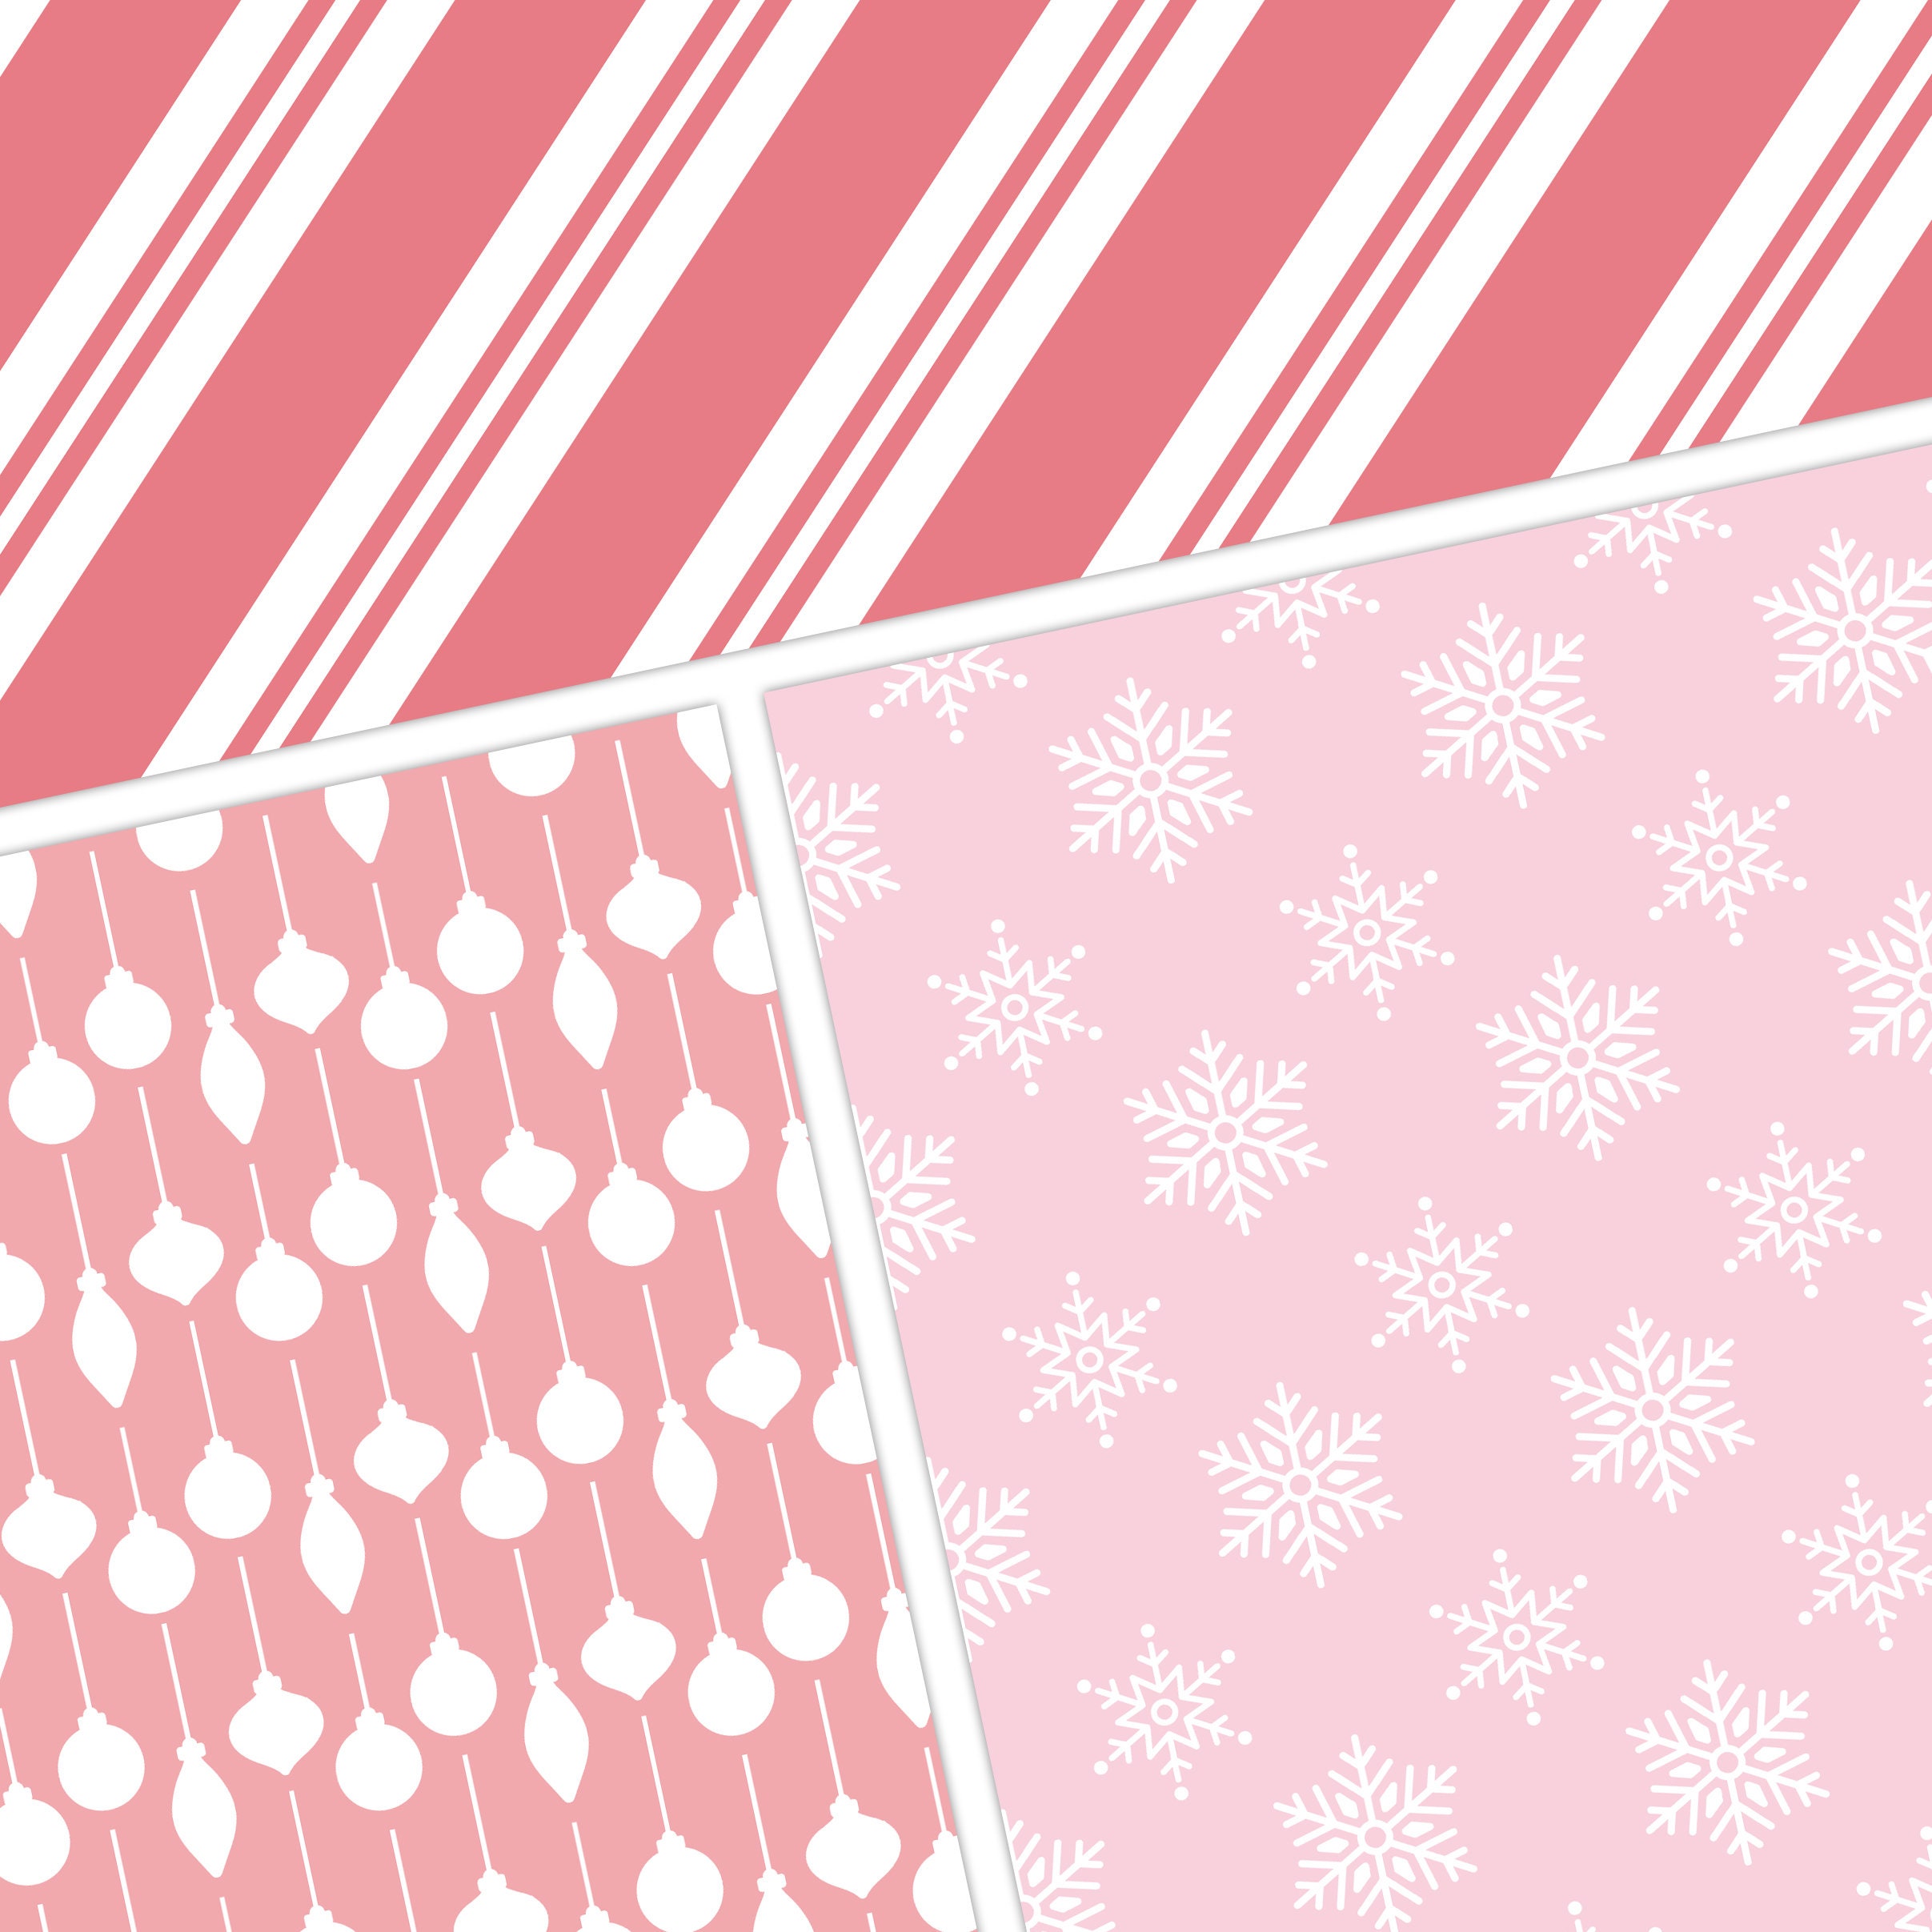 Textured Christmas Digital Scrapbook Papers, Old Fashioned Scrapbook Paper  W/ Ornaments Stockings Argyle & Candy Cane Stripes 